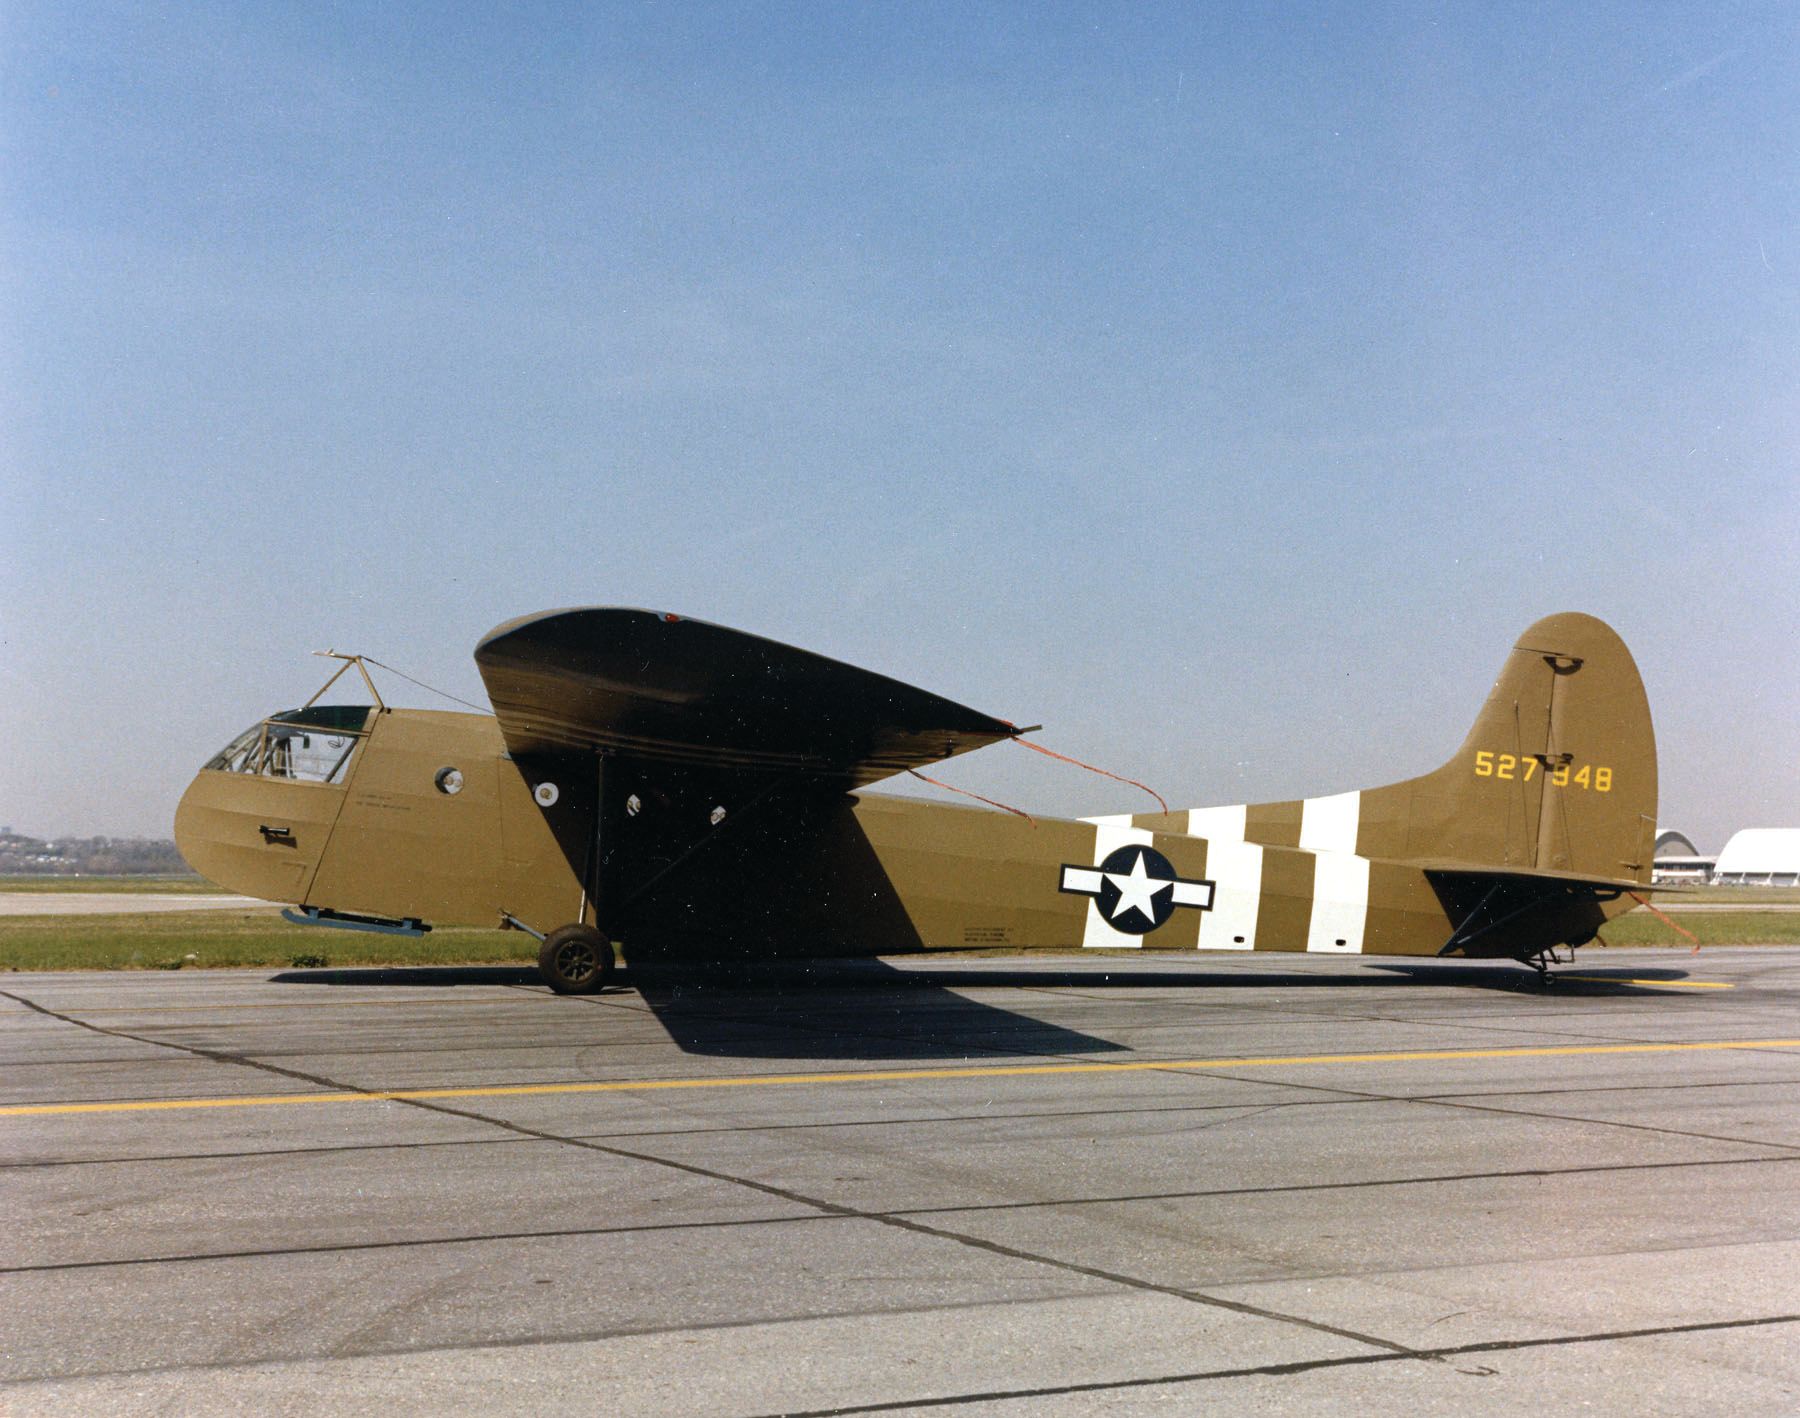 This restored World War II-era Waco glider is on display at the National Museum of the U.S. Air Force at Wright-Patterson Air Force Base near Dayton, Ohio.